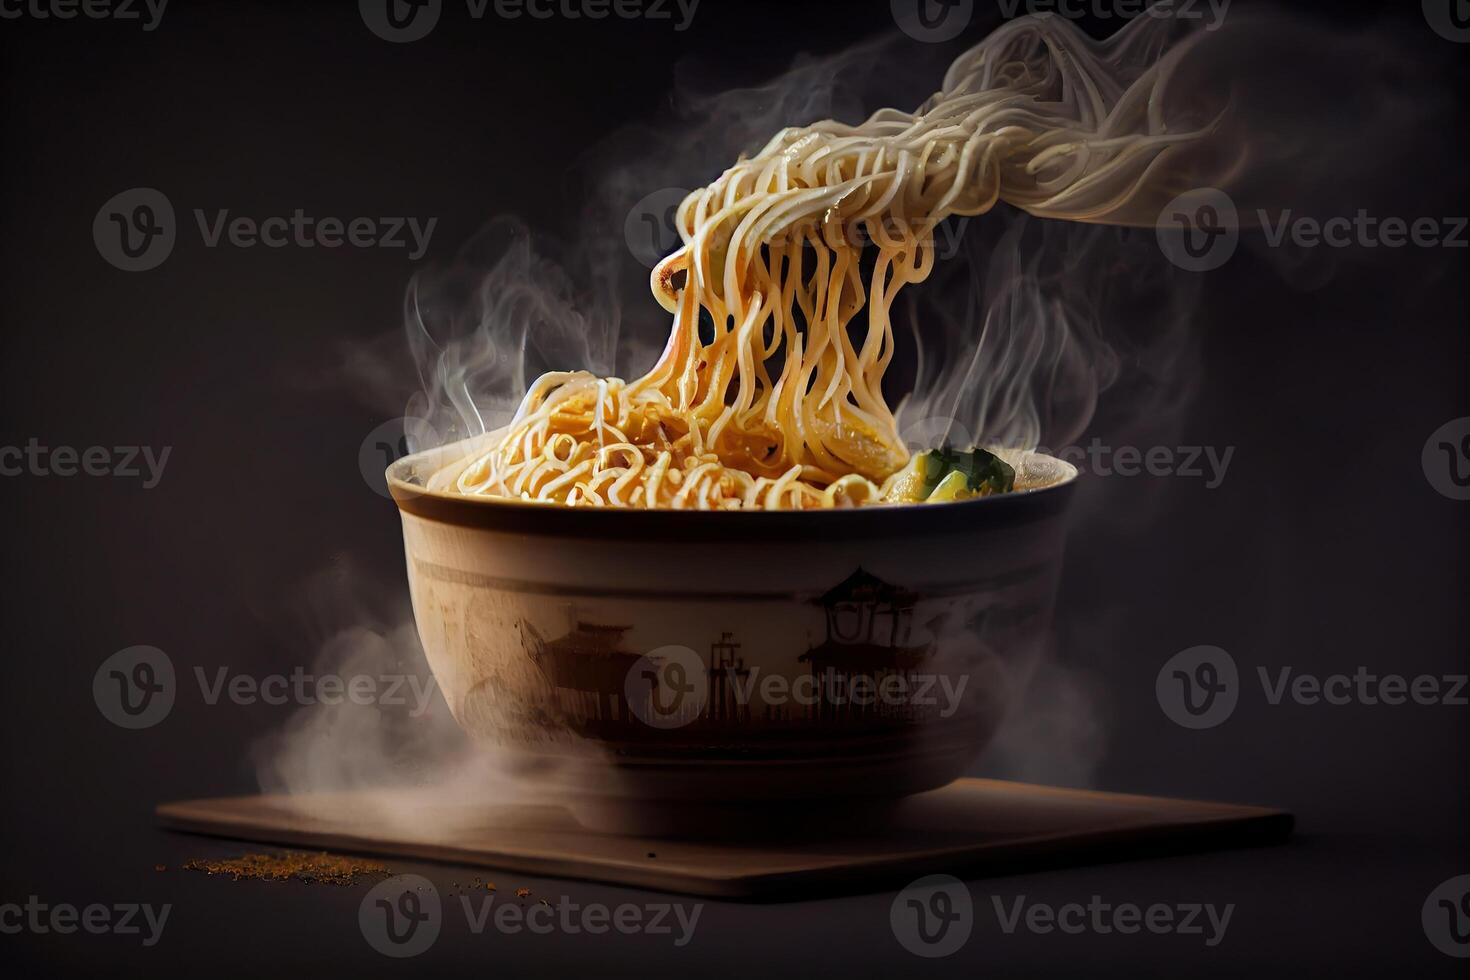 illustration of appetizing bowl of Tom Yum soup, spicy Thai soup with shrimp, seafood, coconut milk and chili pepper in bowl copy space photo